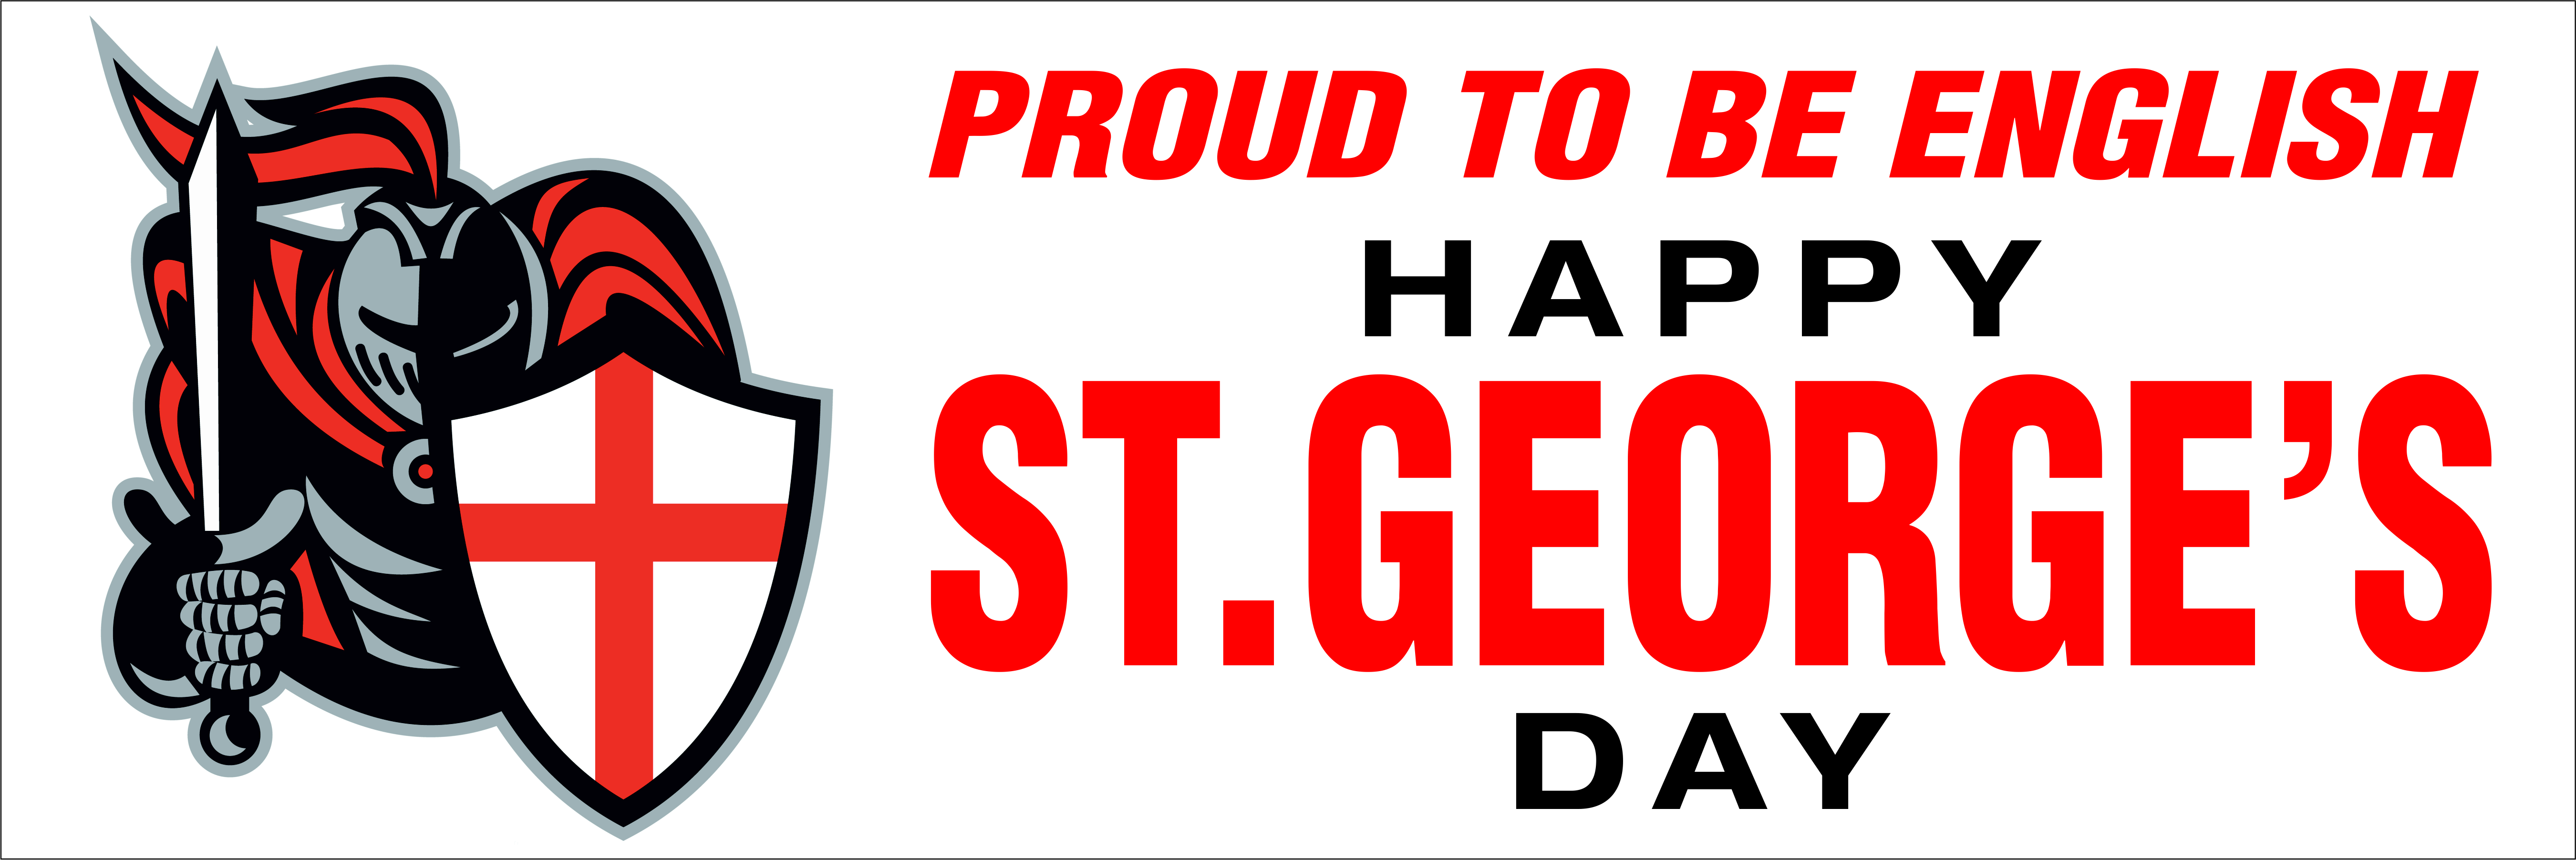 St George Day Wallpaper